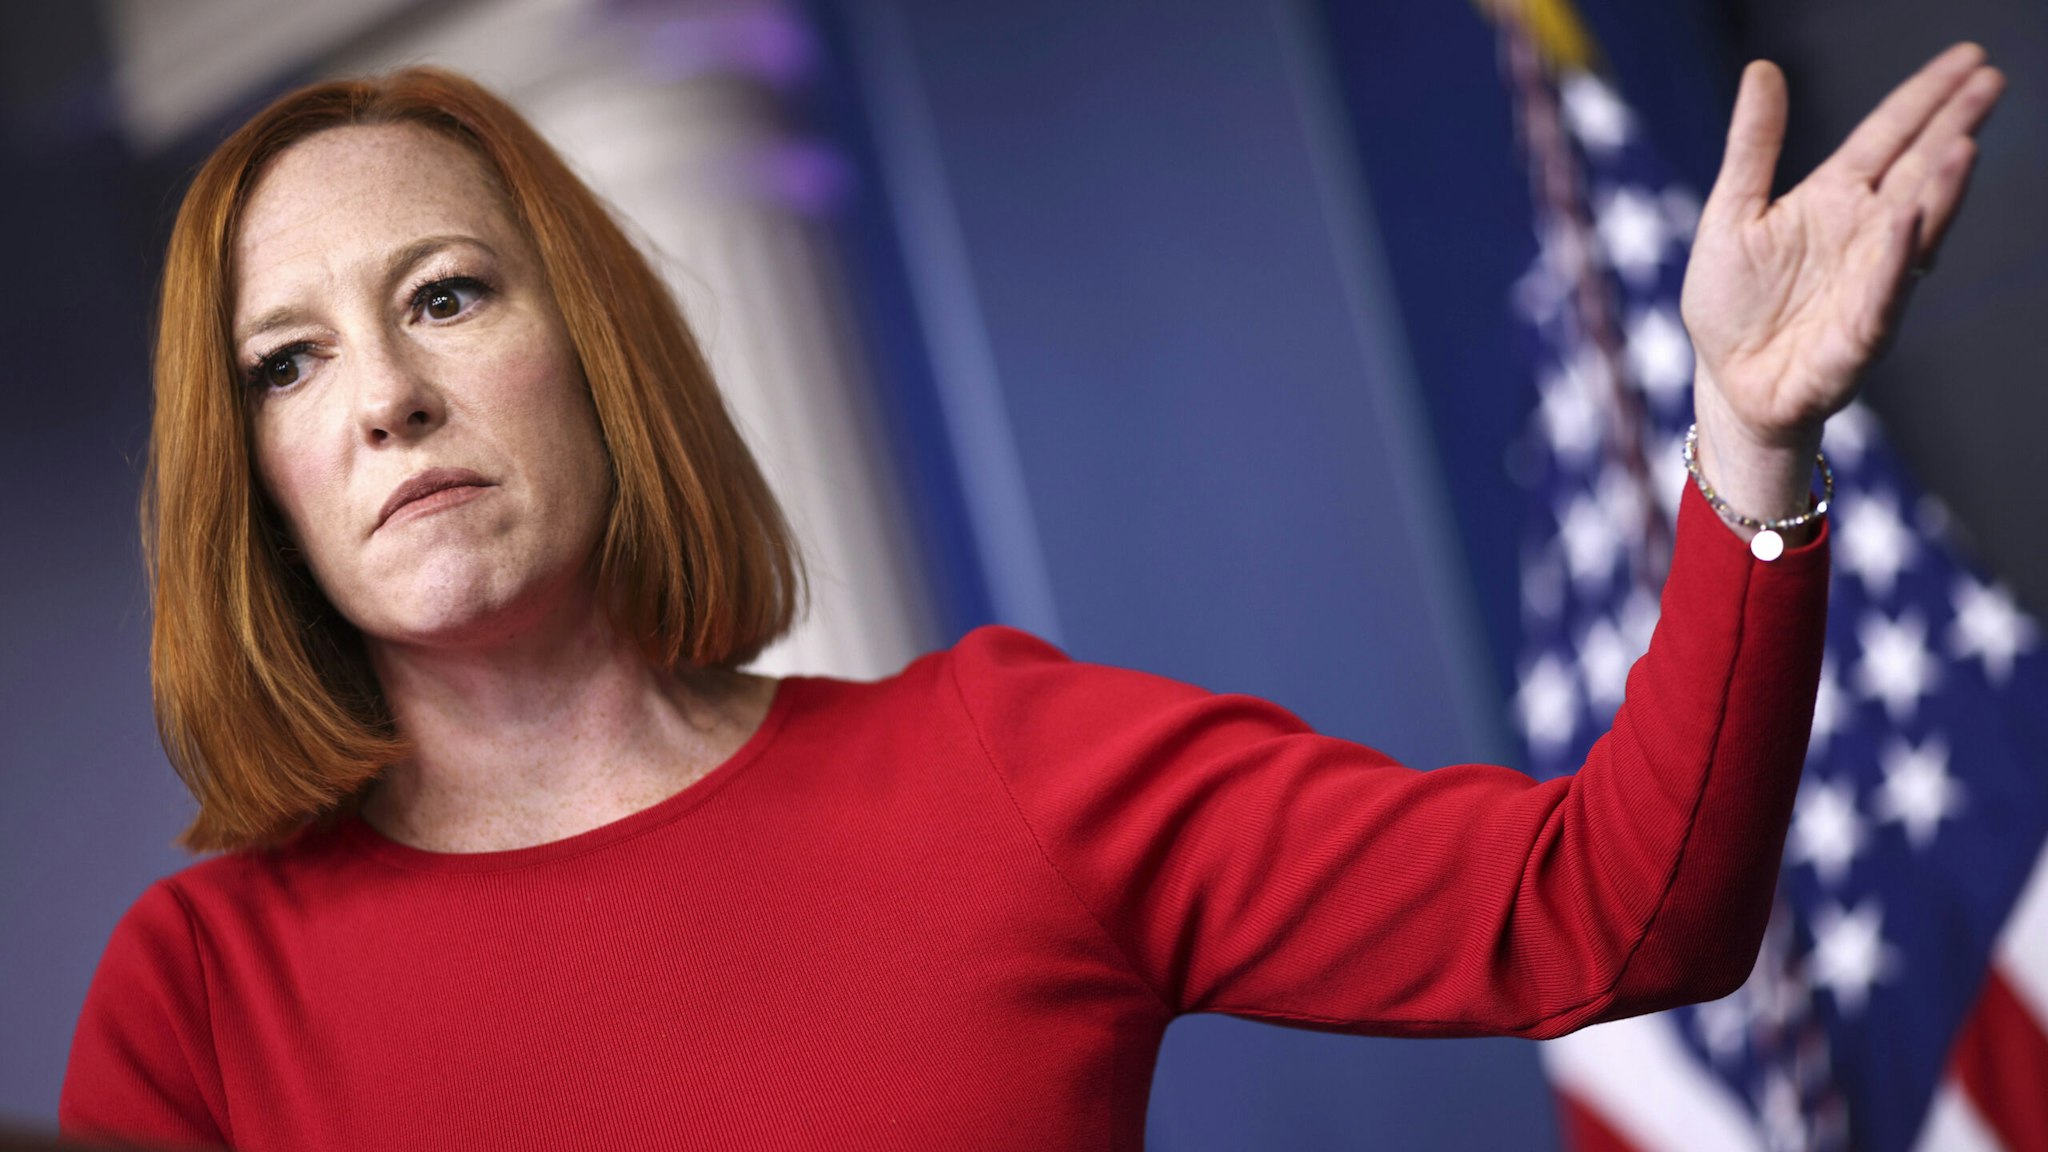 WASHINGTON, DC - OCTOBER 19: White House Press Secretary Jen Psaki speaks during a press briefing at the White House on October 19, 2021 in Washington, DC. Psaki spoke about the ongoing bipartisan infrastructure bill negotiations.